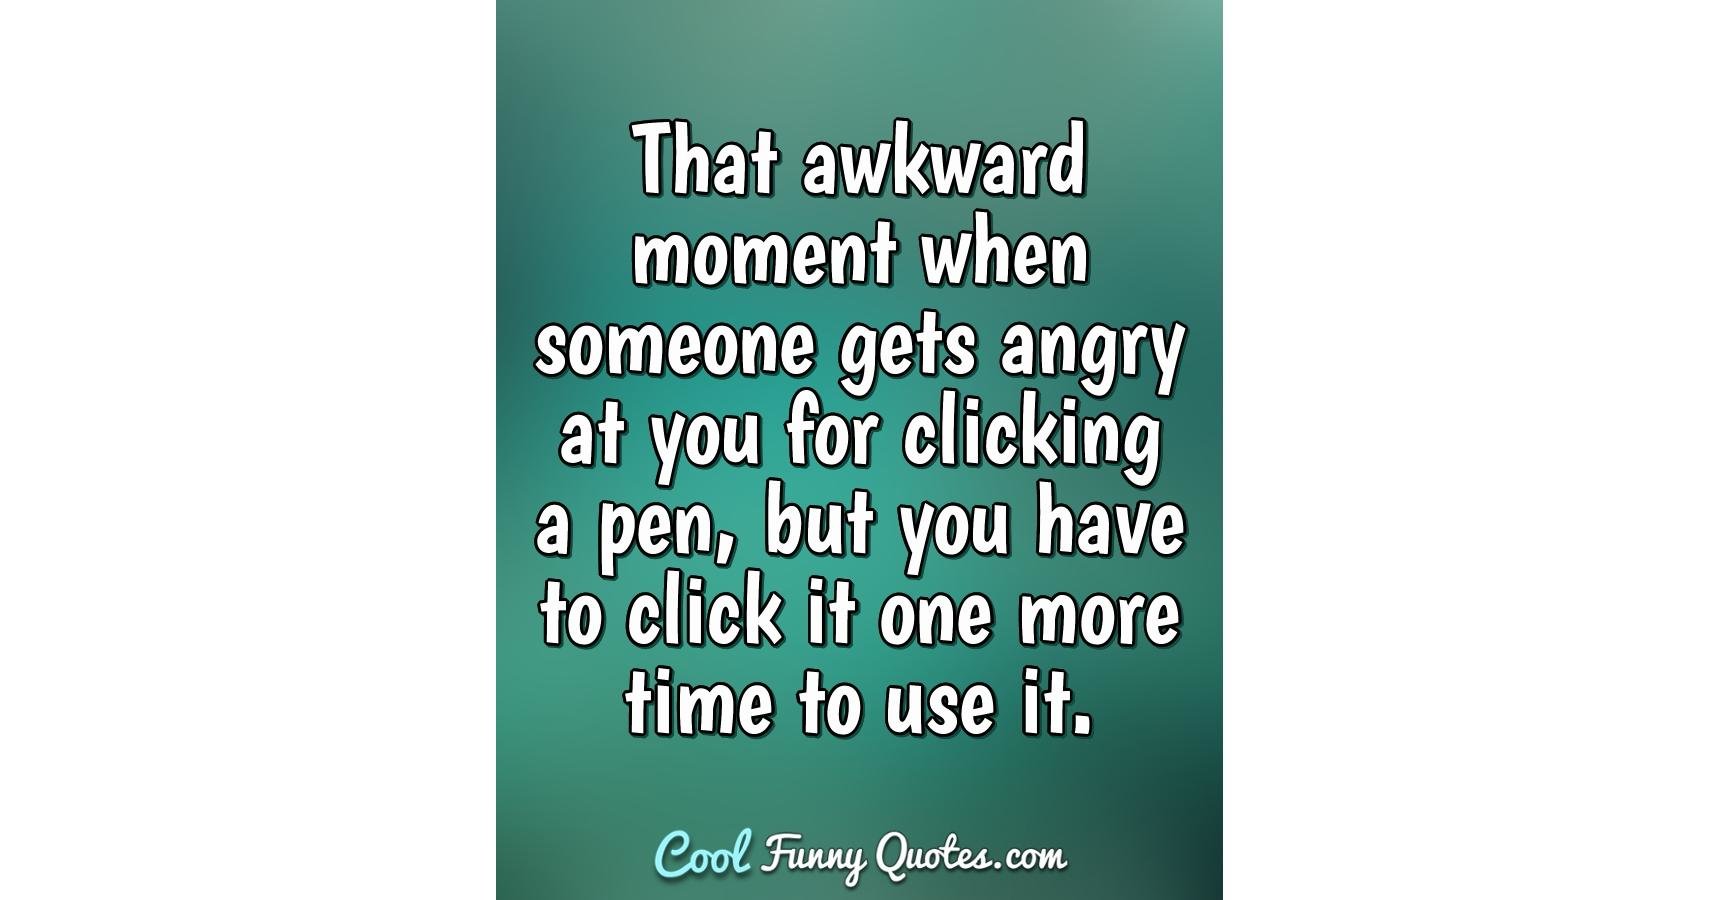 That awkward moment when someone gets angry at you for clicking a pen